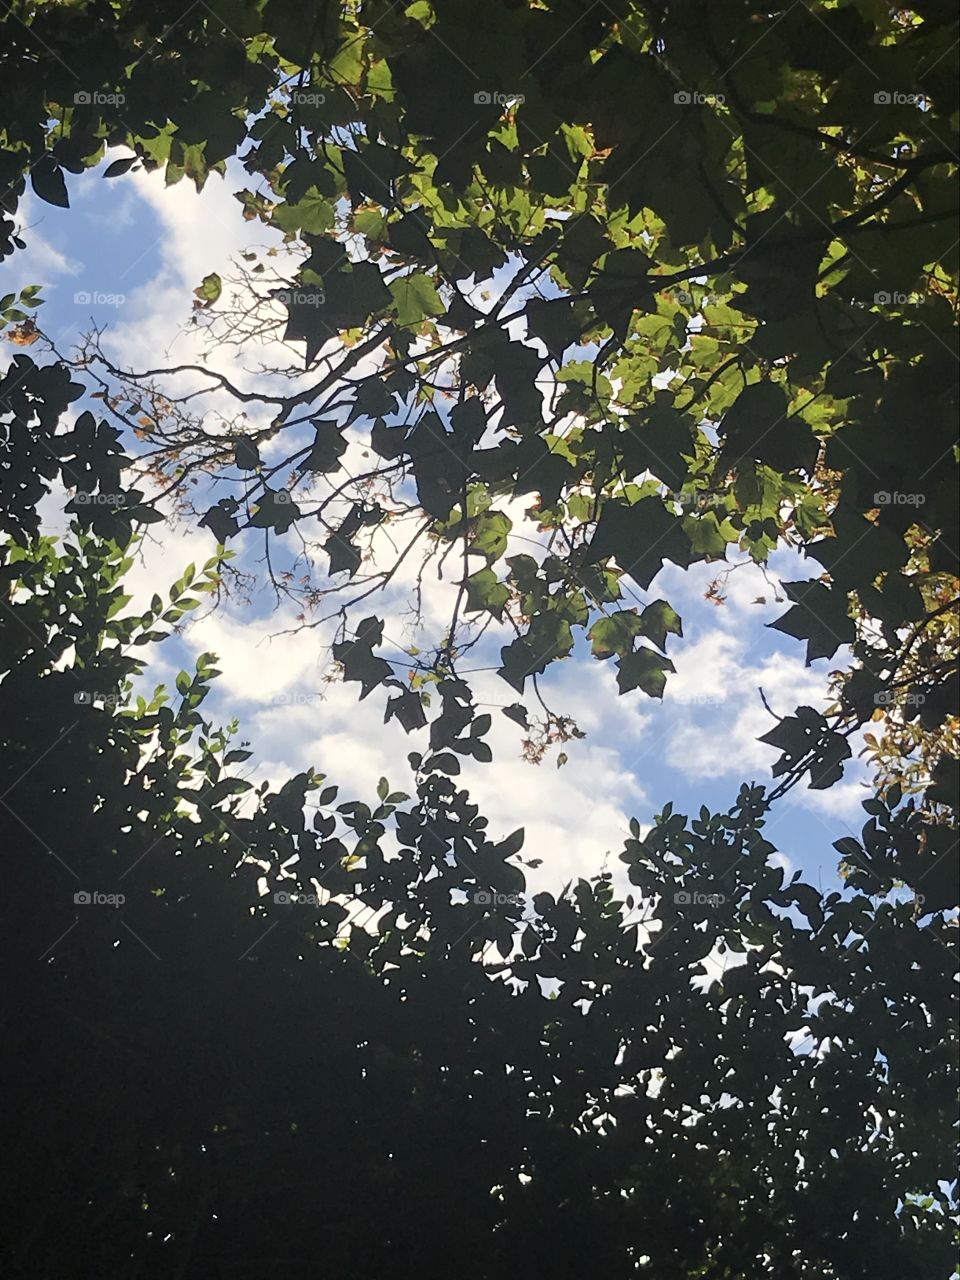 The cloud-covered sky peeks through the leaves.